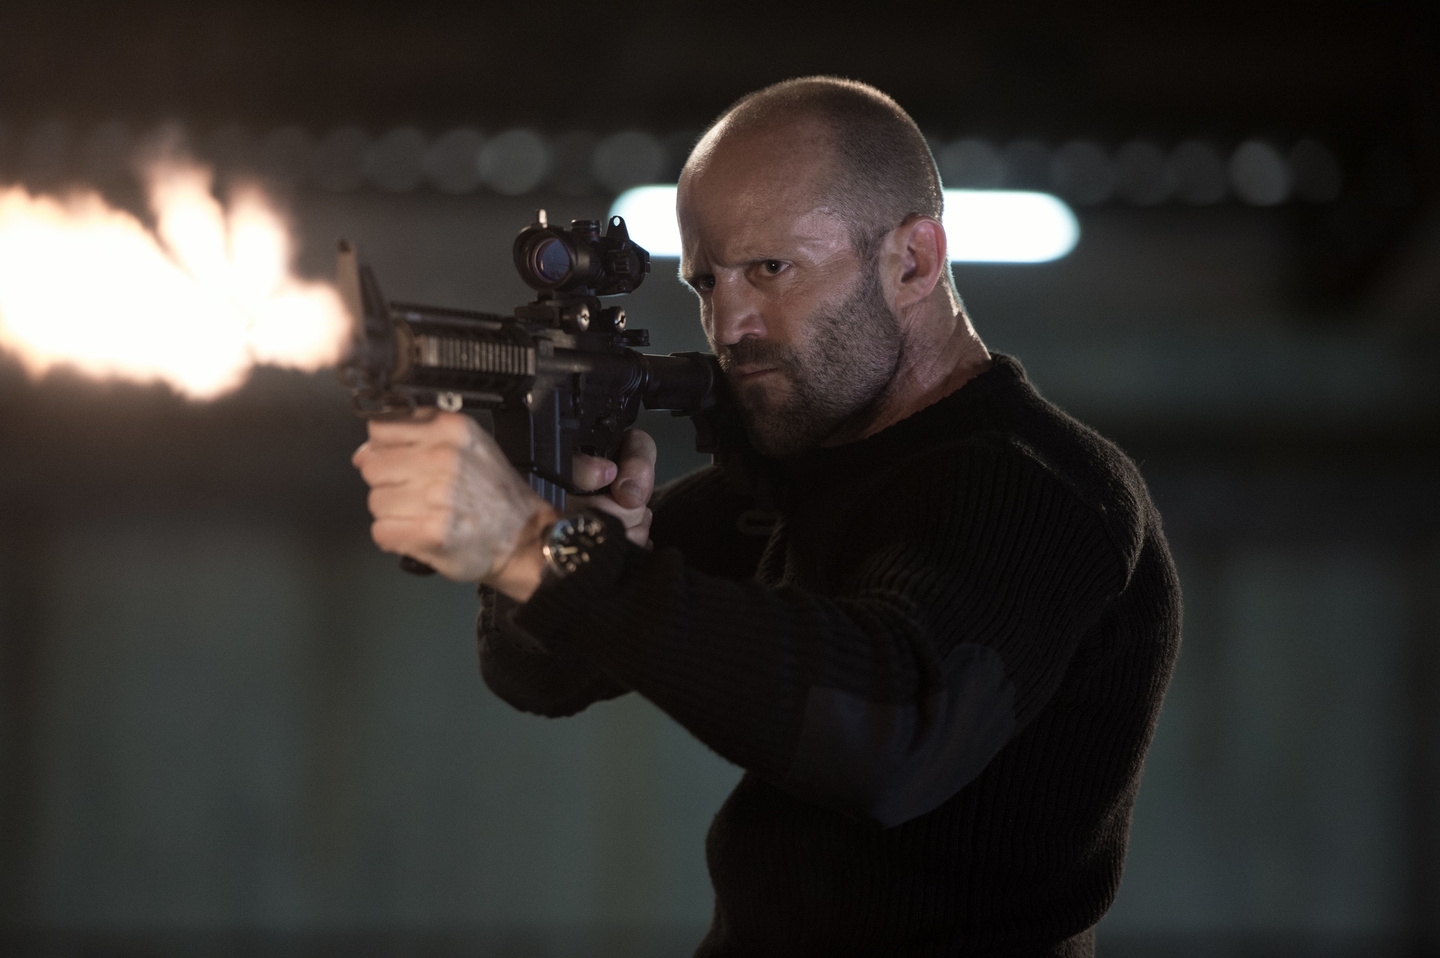 Mechanic: Resurrection, The / Mechanic 2 - Resurrection, The